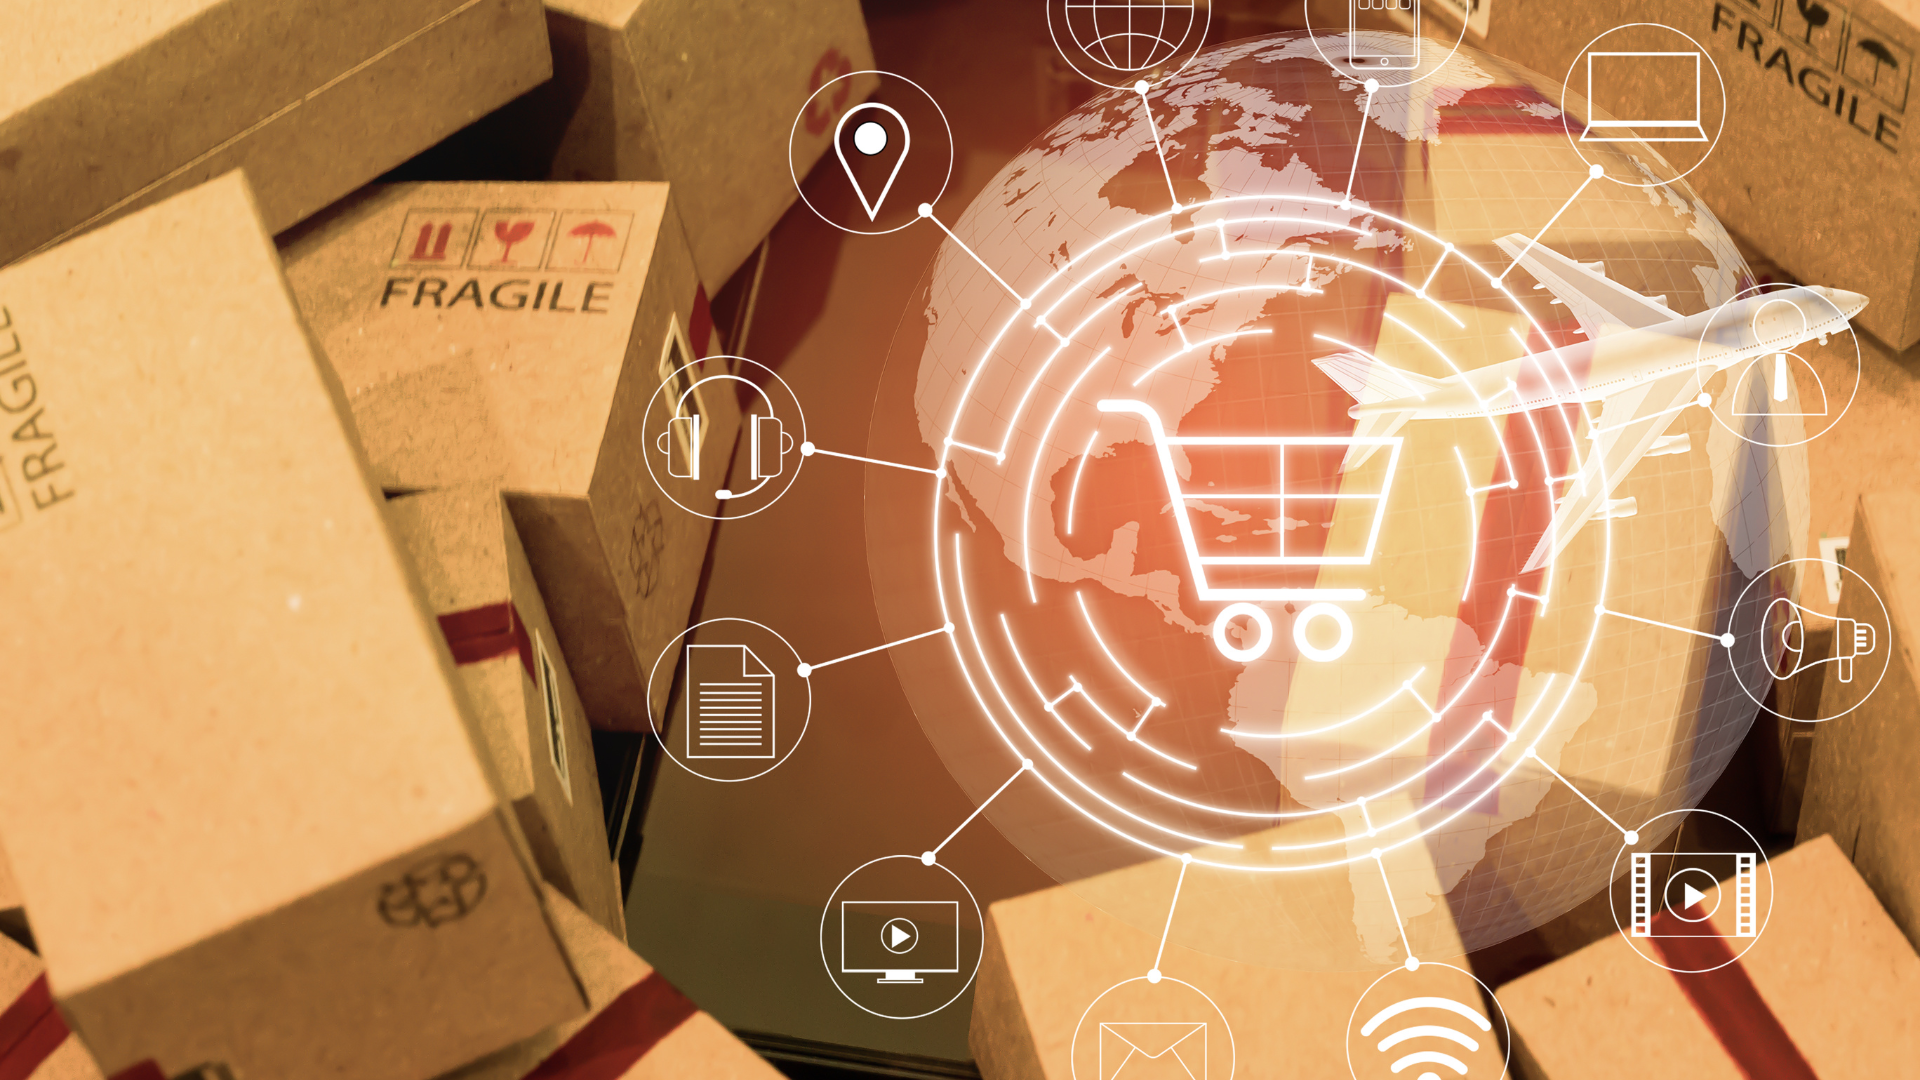 A graphic representing e-commerce logistics on a background of boxes